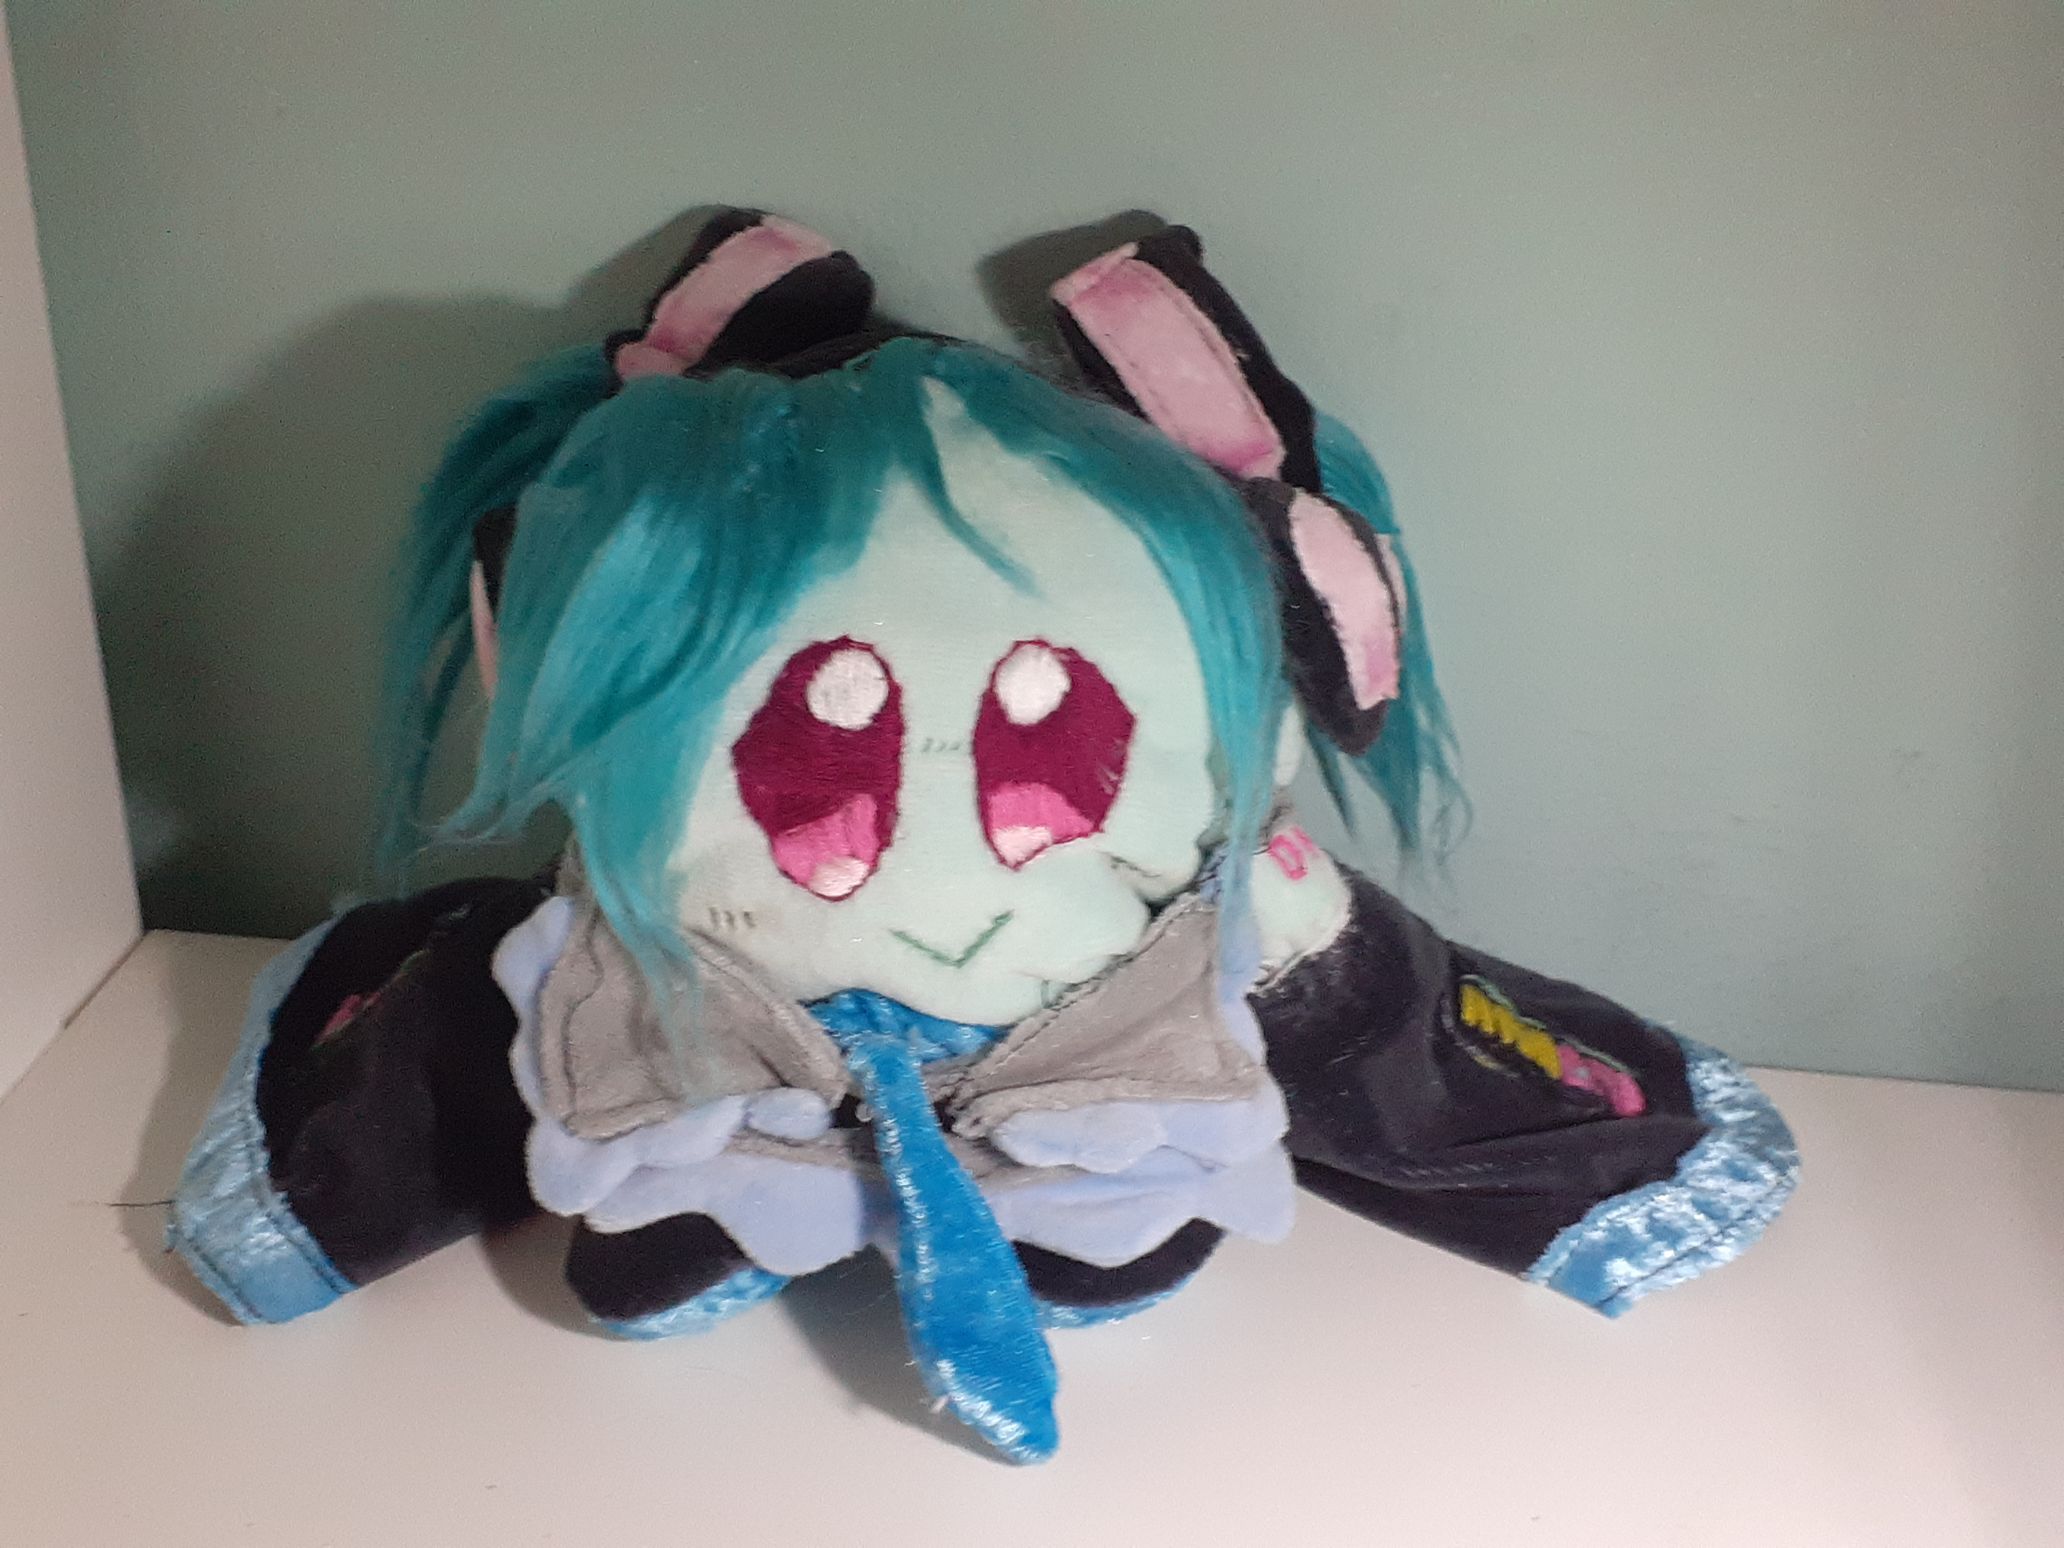 Plushie of Hatsune Miku, but as an adorable puffball!